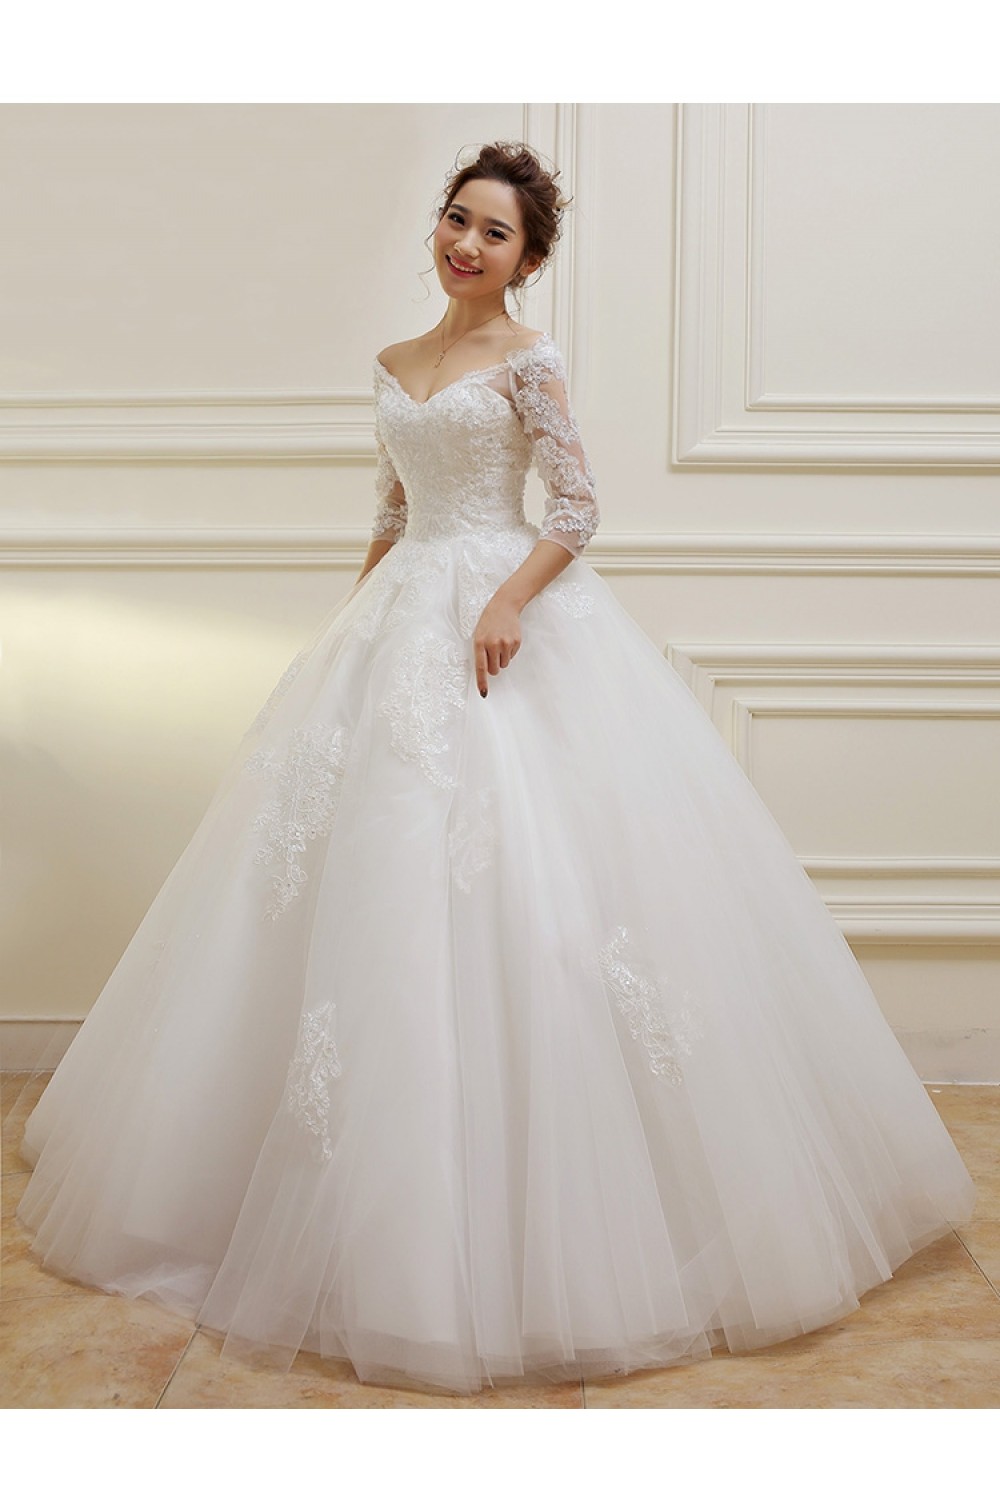 3 4 Length Wedding Dresses Top Review - Find the Perfect Venue for Your ...